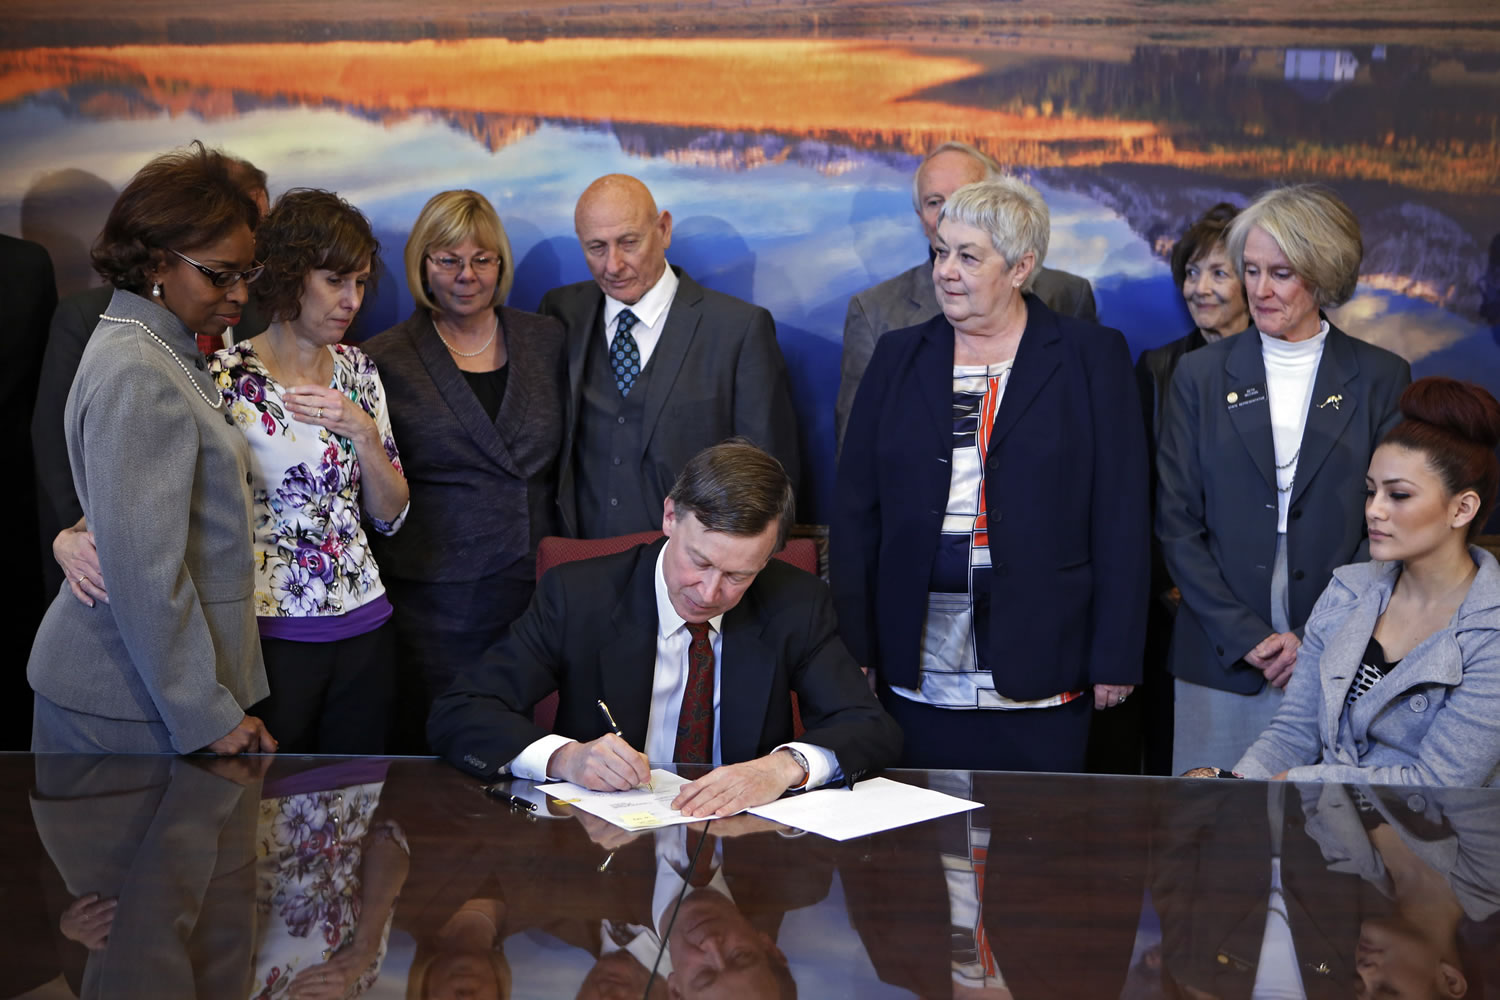 Sponsors and family members of victims watch as Colorado Gov. John Hickenlooper signs control bills into law at the Capitol in Denver on Wednesday.